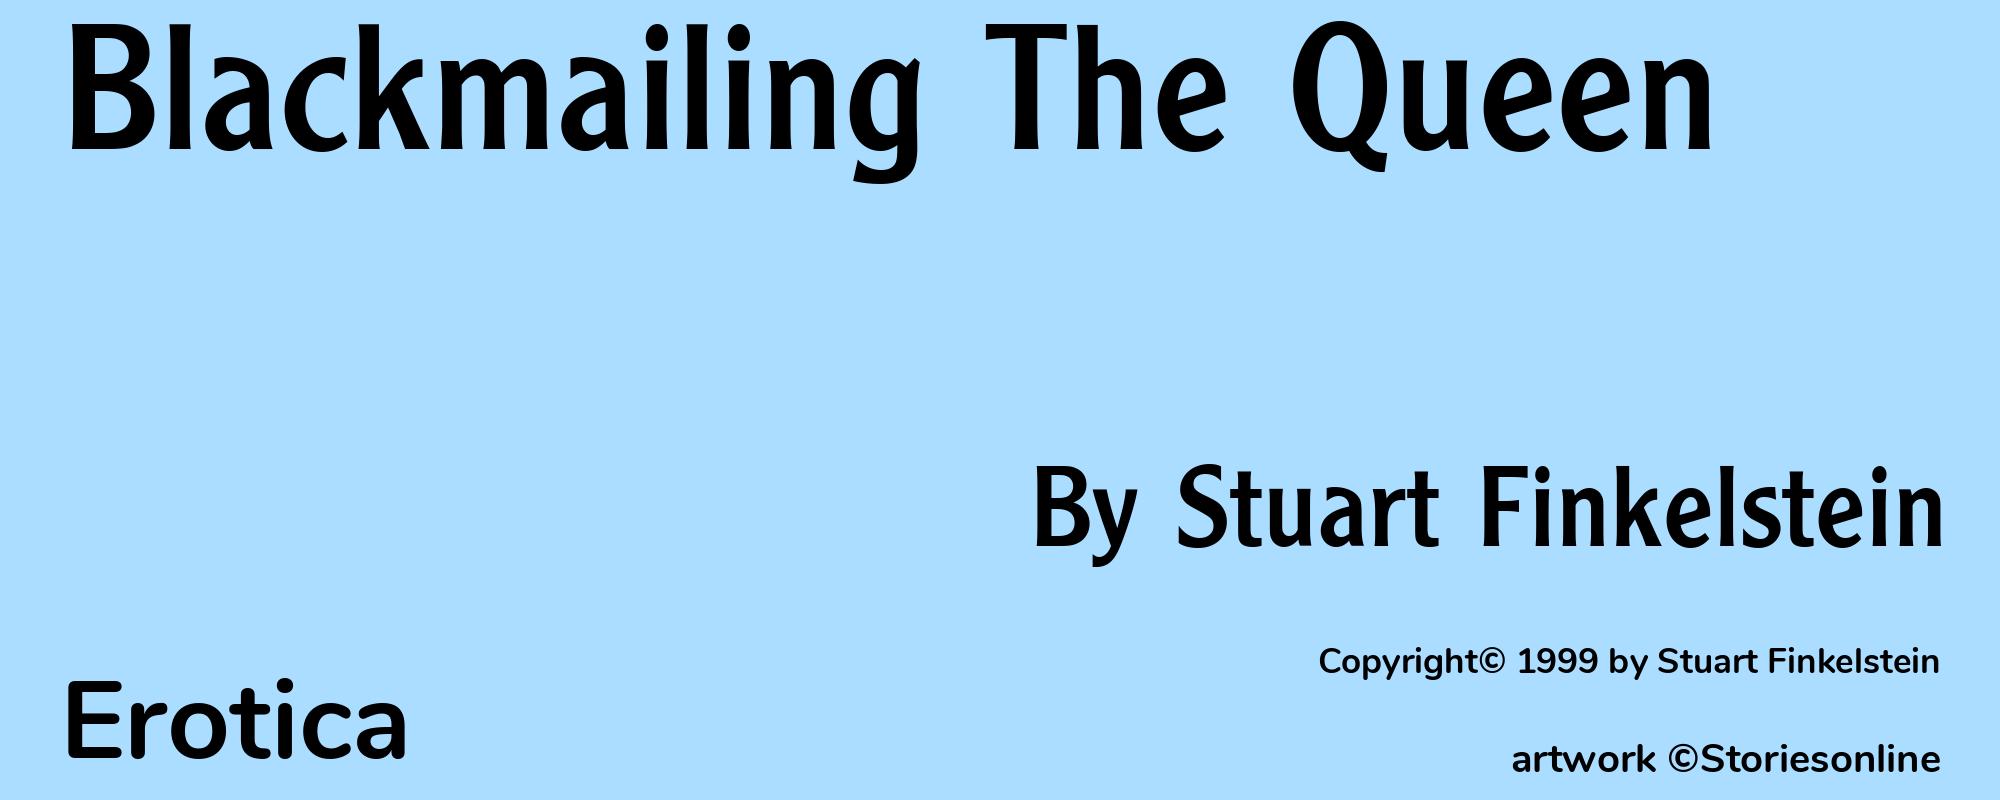 Blackmailing The Queen - Cover